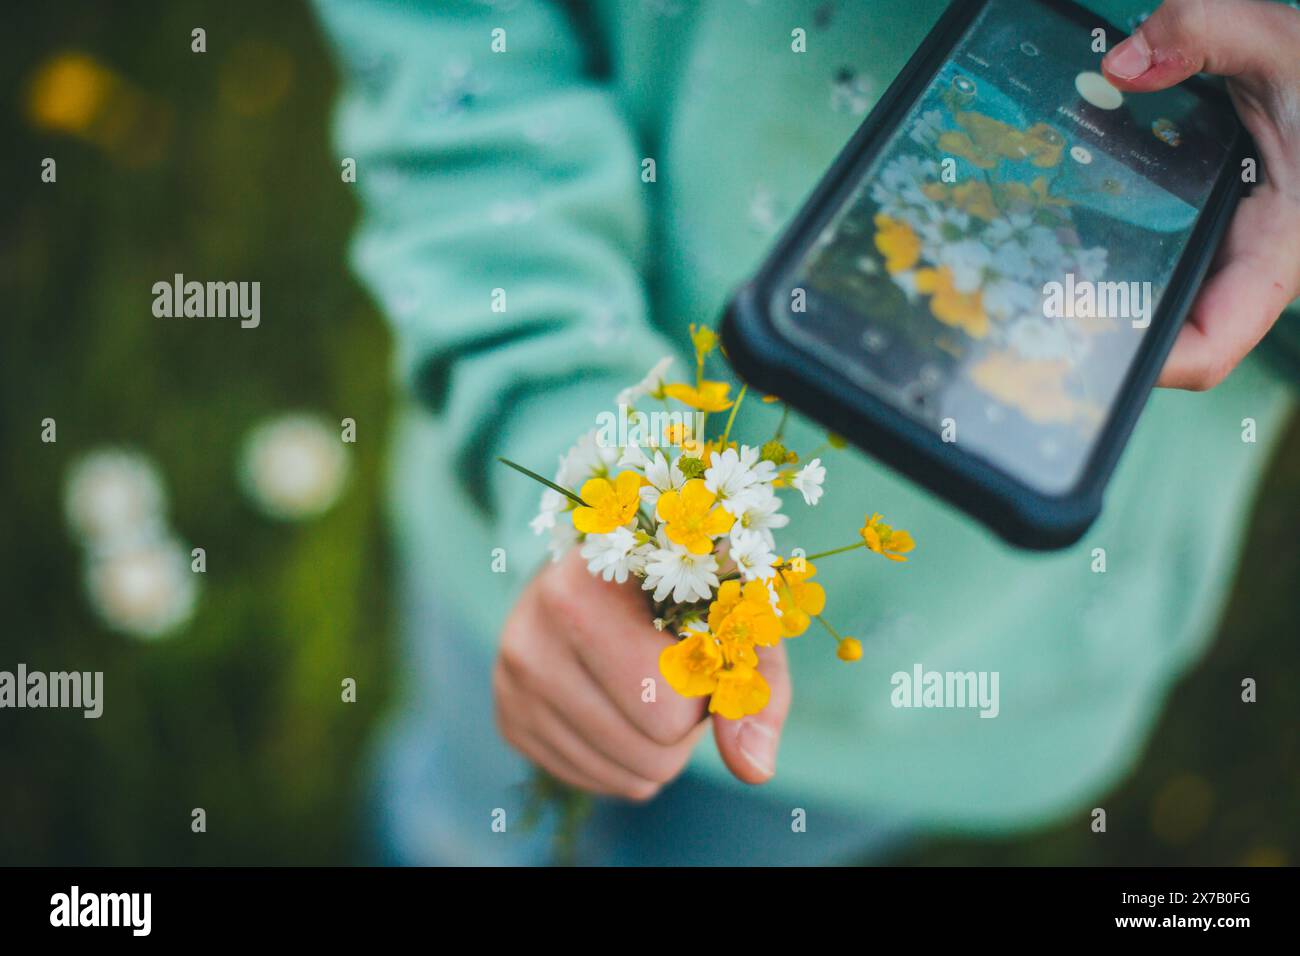 Girl taking pictures of a nosegay of picked flowers, using her mobile phone Stock Photo